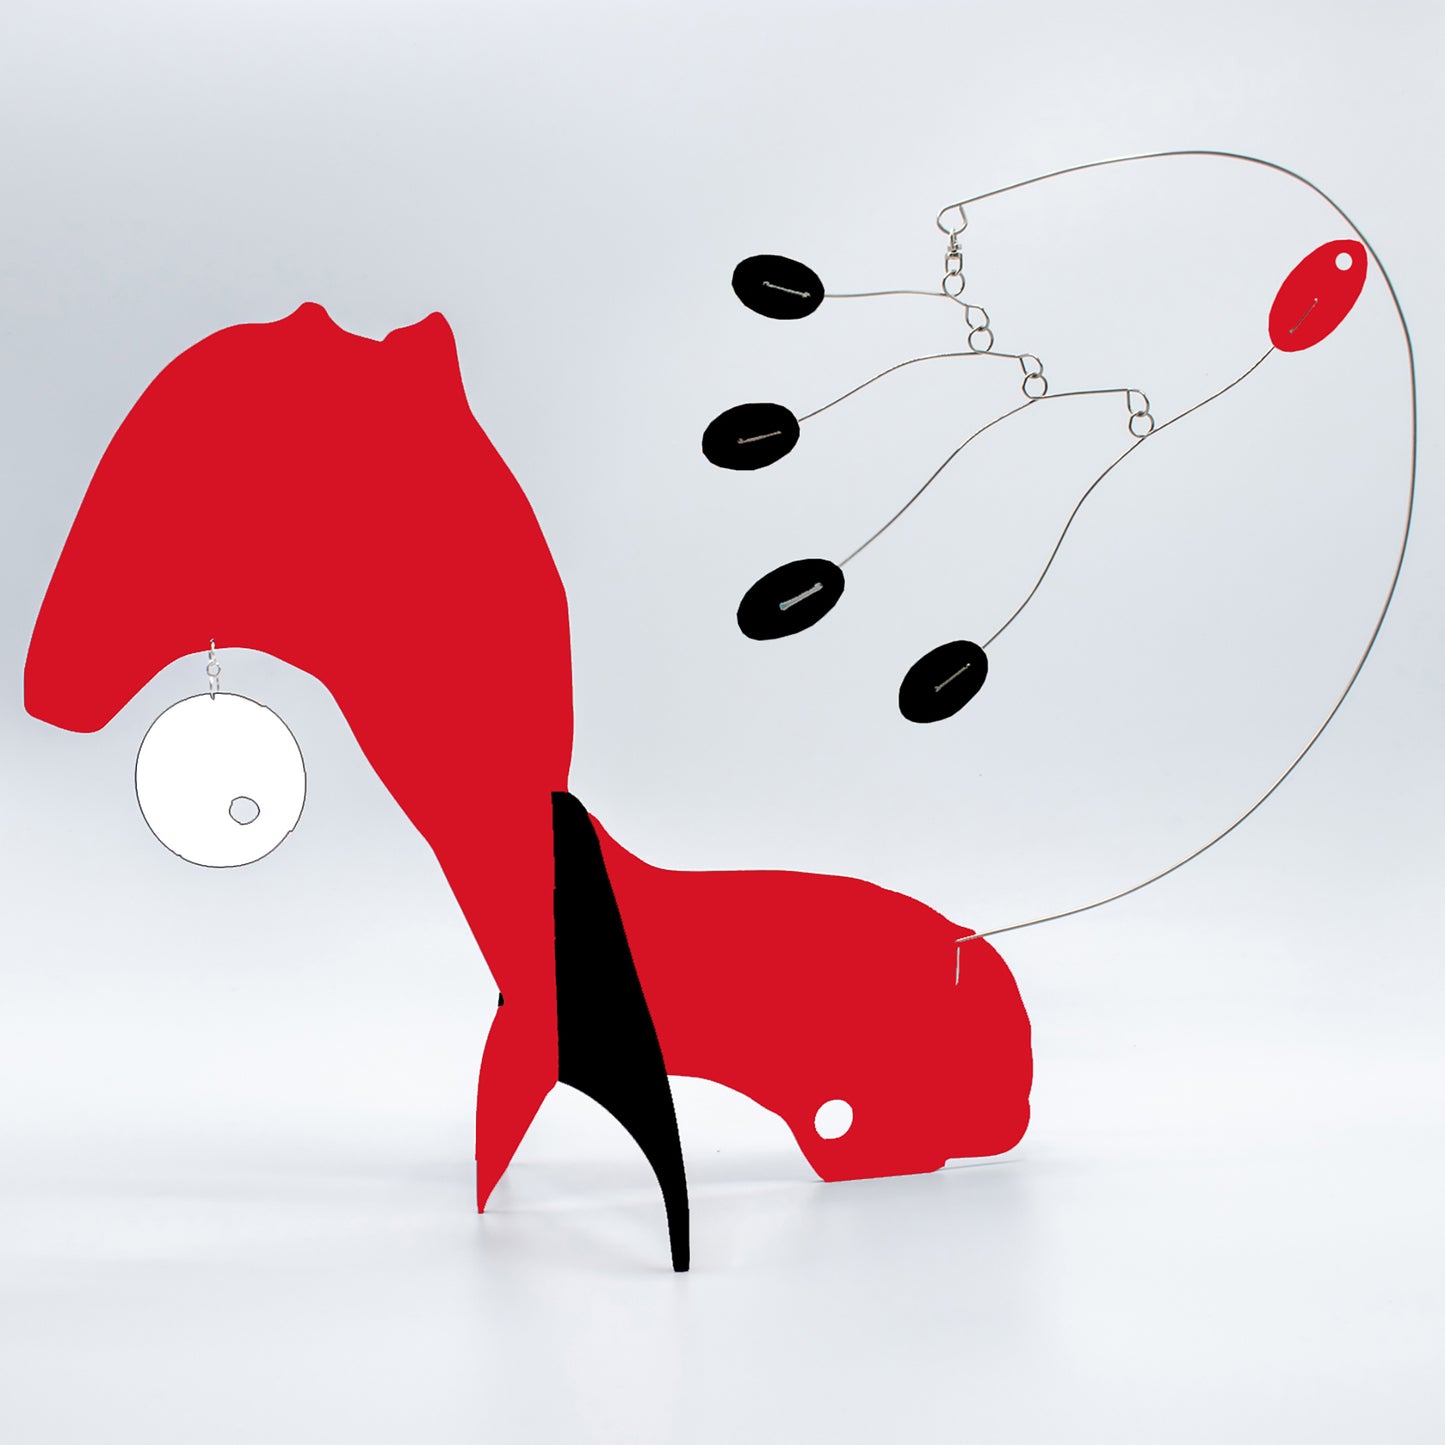 KinetiCats Collection Fox in Red, Black, and White - one of 12 Modern Cute Abstract Animal Art Sculpture Kinetic Stabiles inspired by Dada and mid century modern style art by AtomicMobiles.com